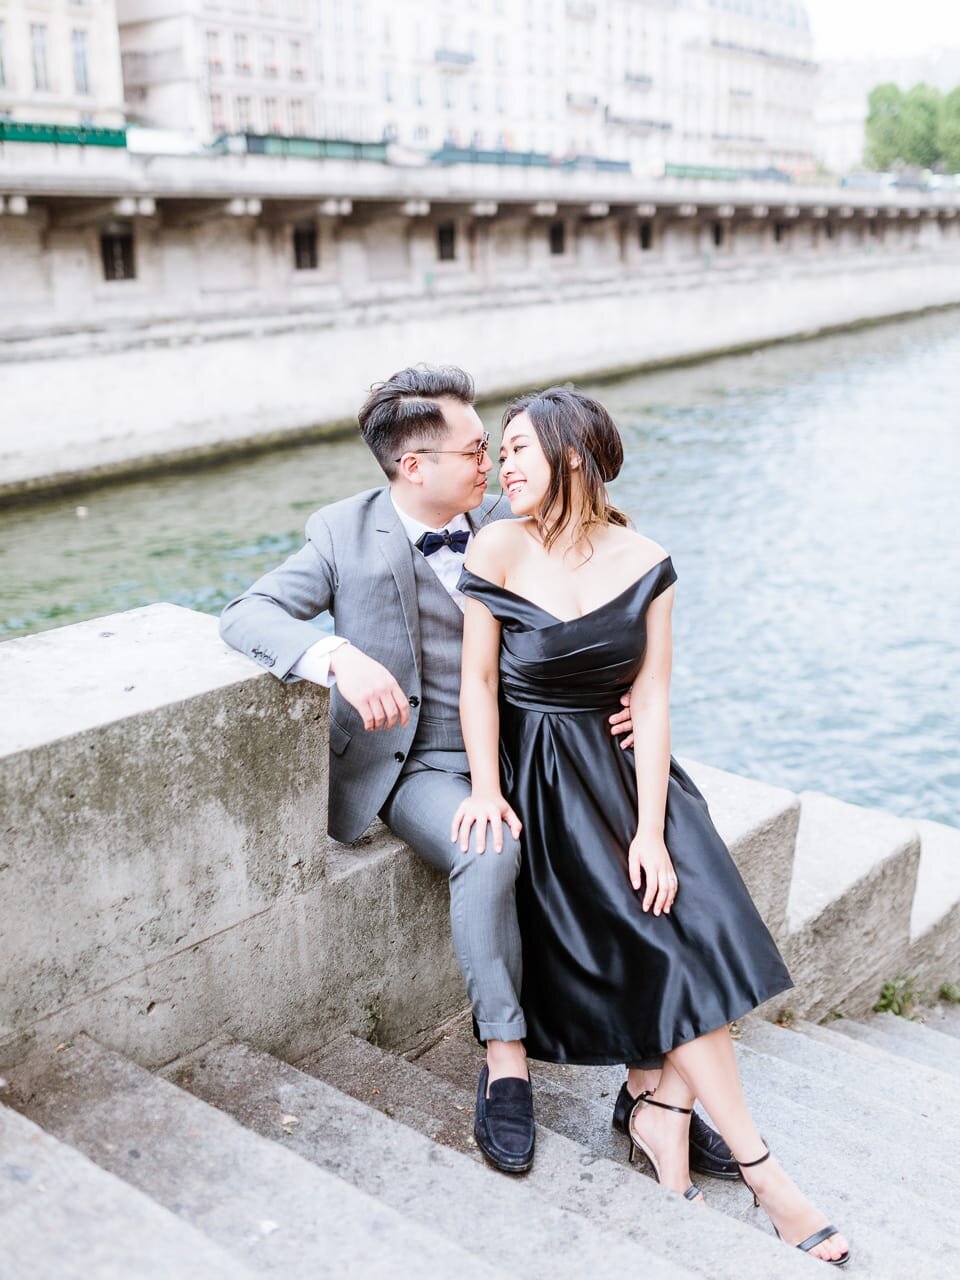 Wedding Photos 101: How To Get The Most Out Of Your Photoshoots